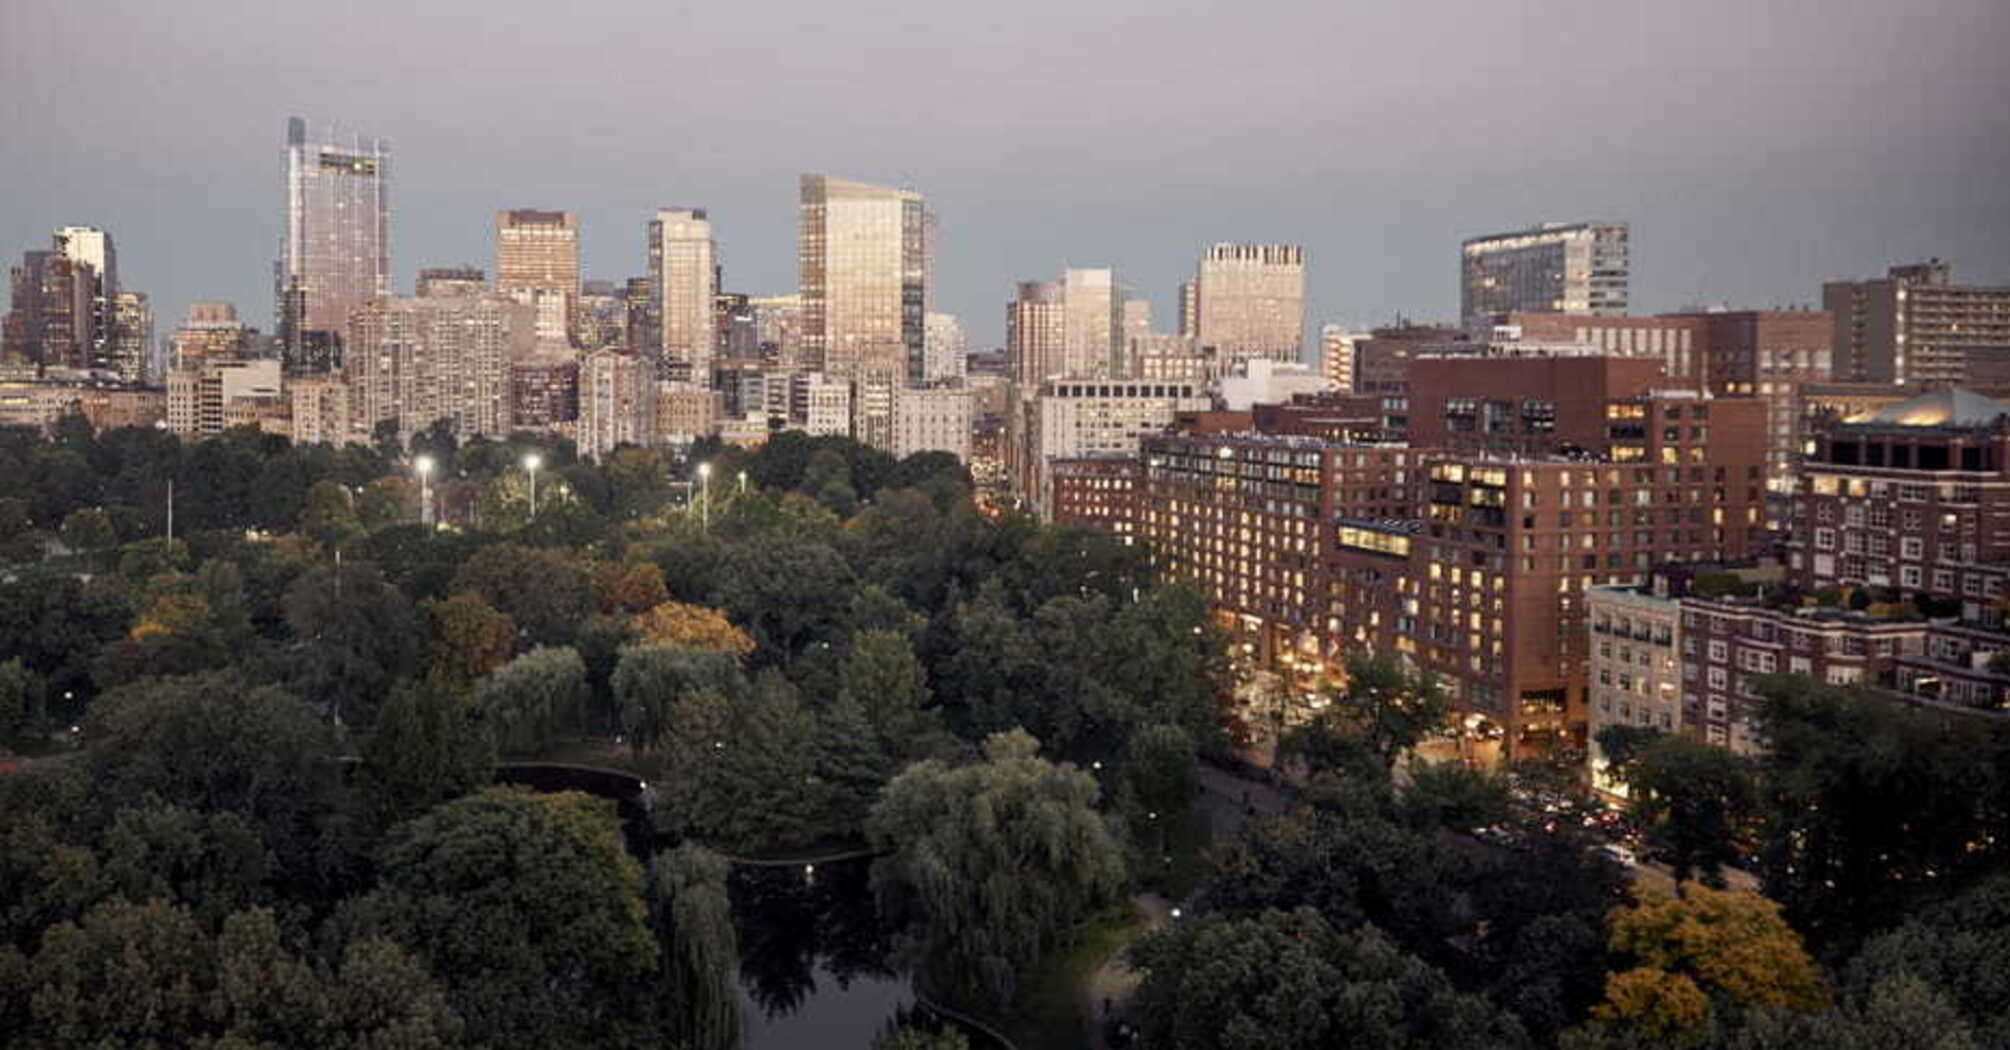 Top 10 Boston hotels: from chic urban resorts and sophisticated boutiques to modern skyscrapers and historic hideaways